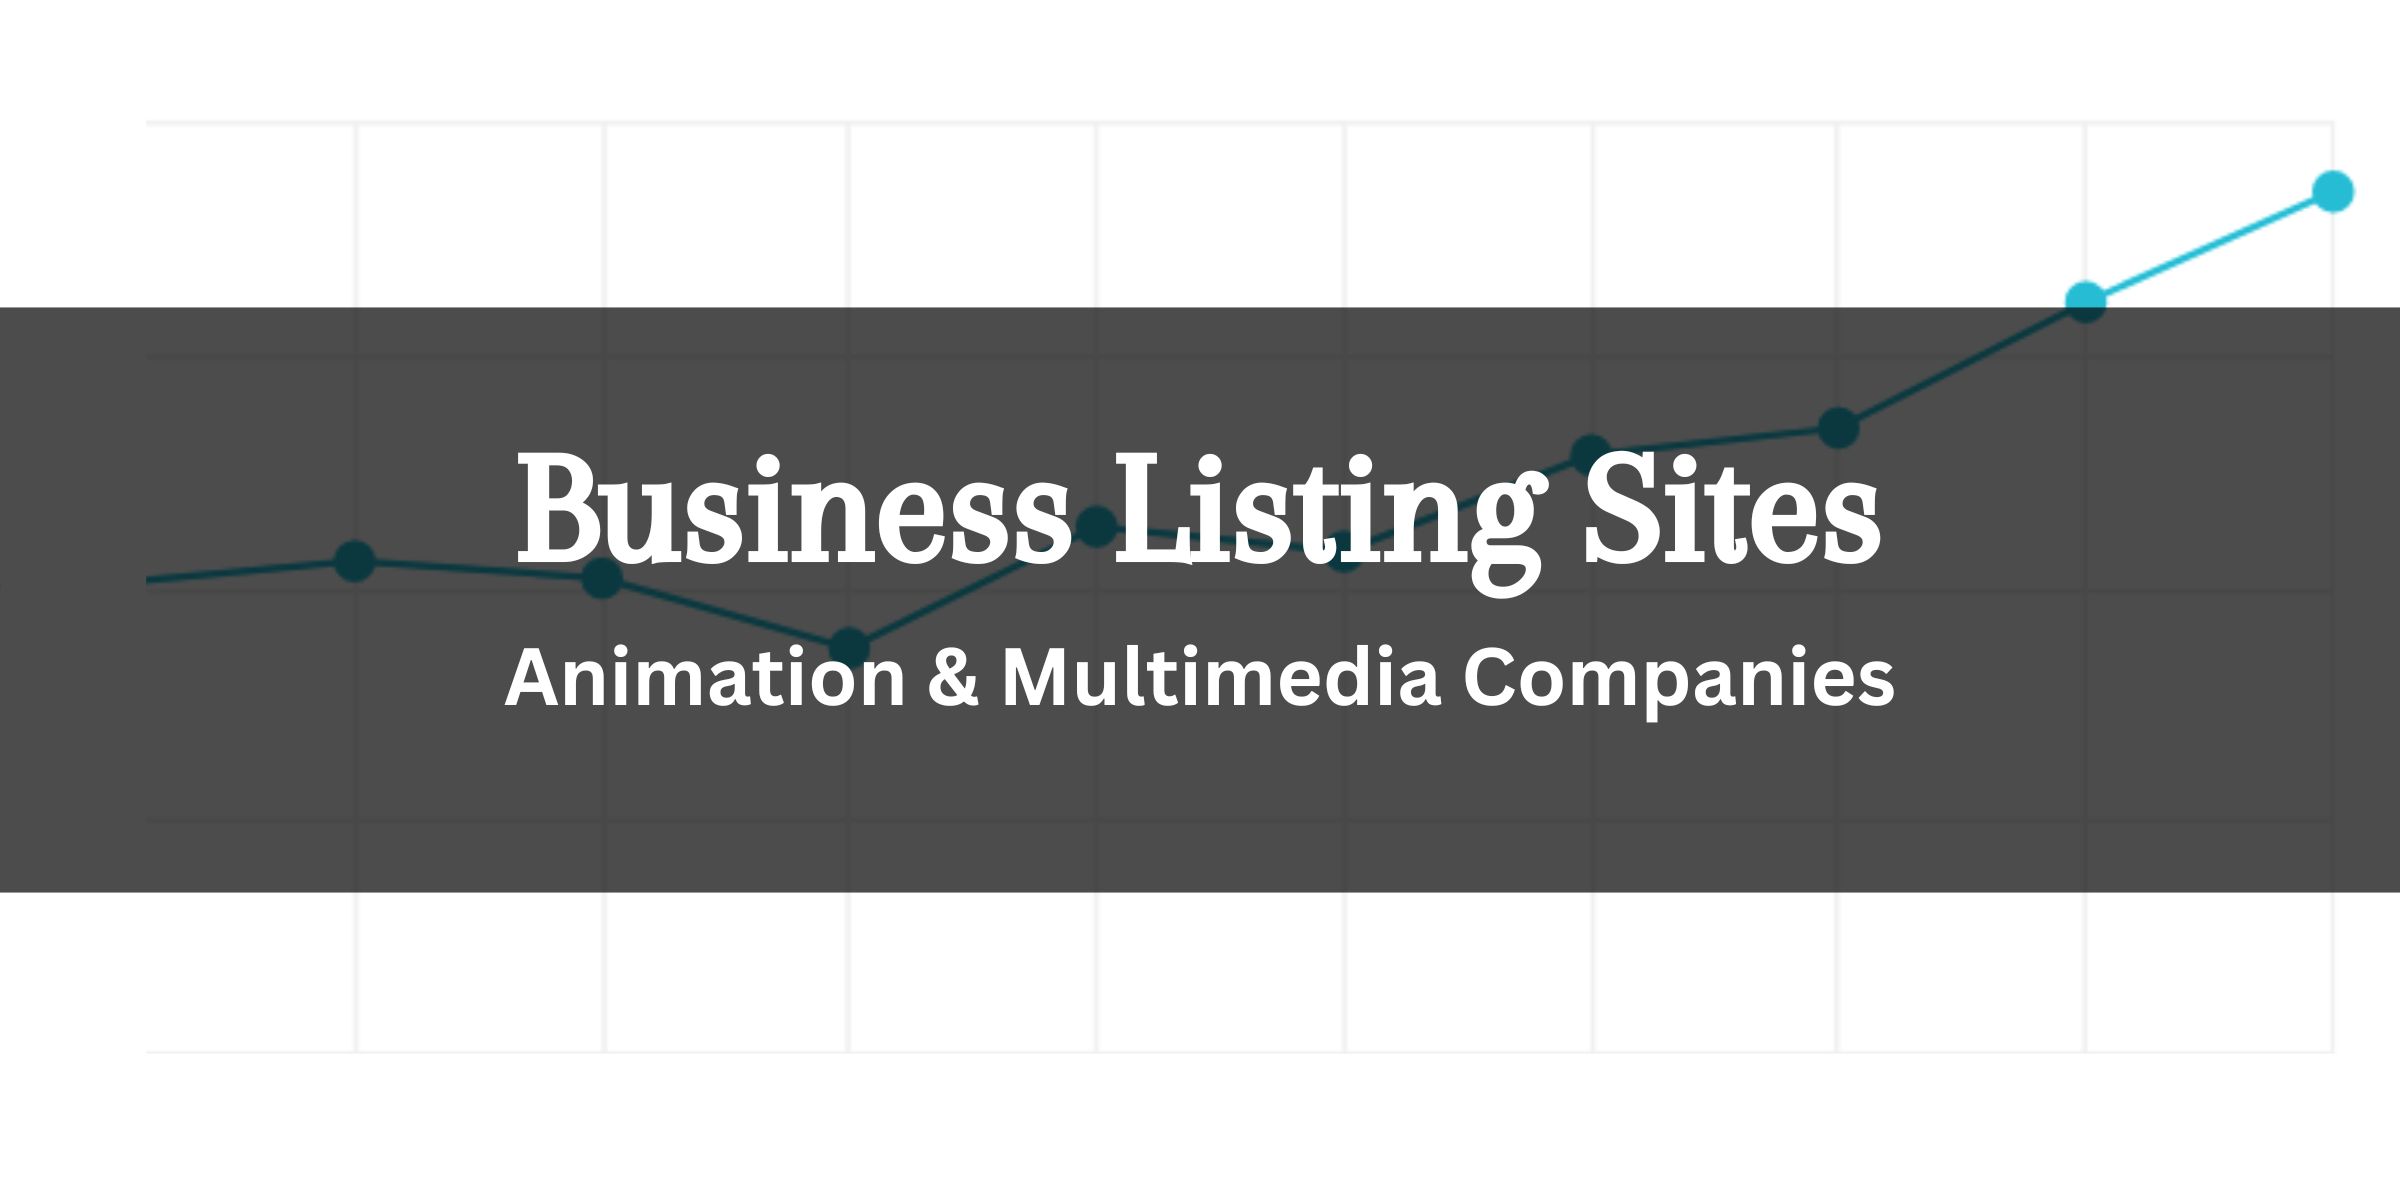 Business Listing Sites for Animation & Multimedia Companies